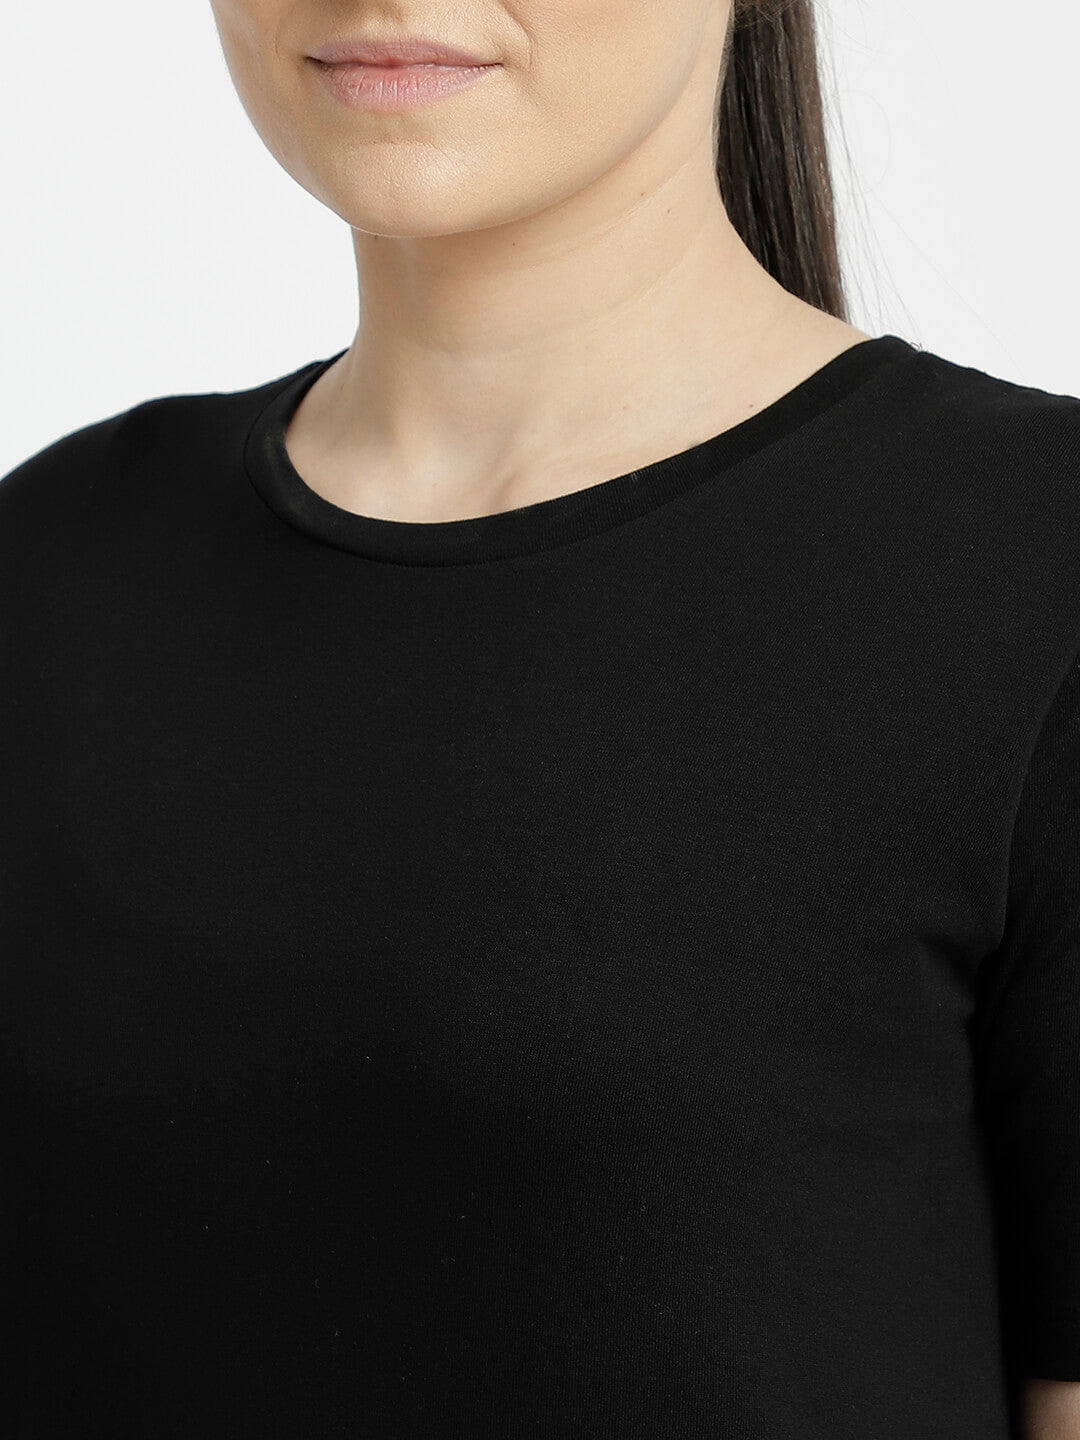 Tany Round Neck Black T-Shirt for Women